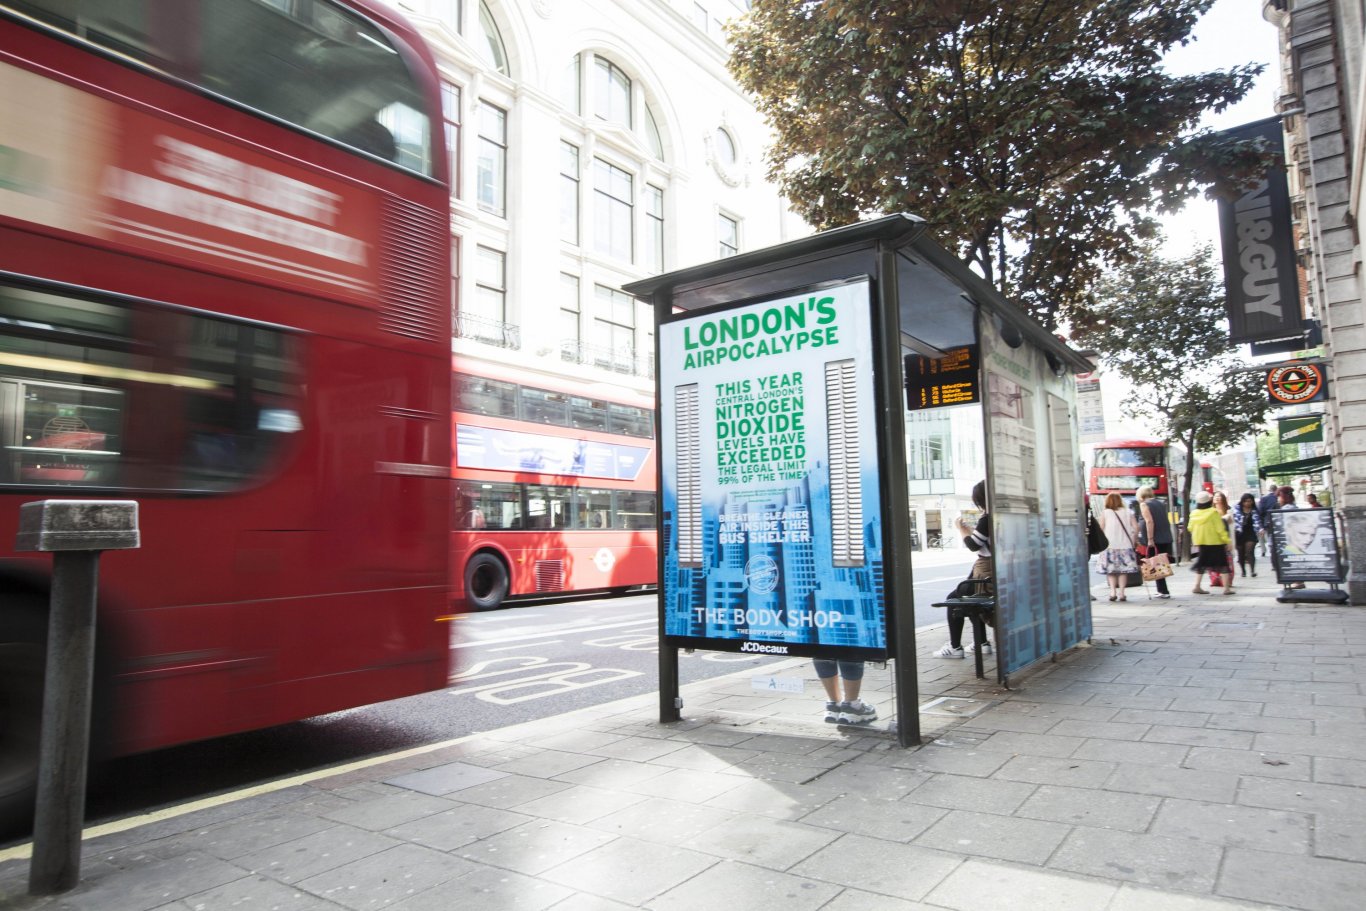 Sustainable OOH: The body shop and Airlabs bus shelter cleans London's air, JCDecaux UK